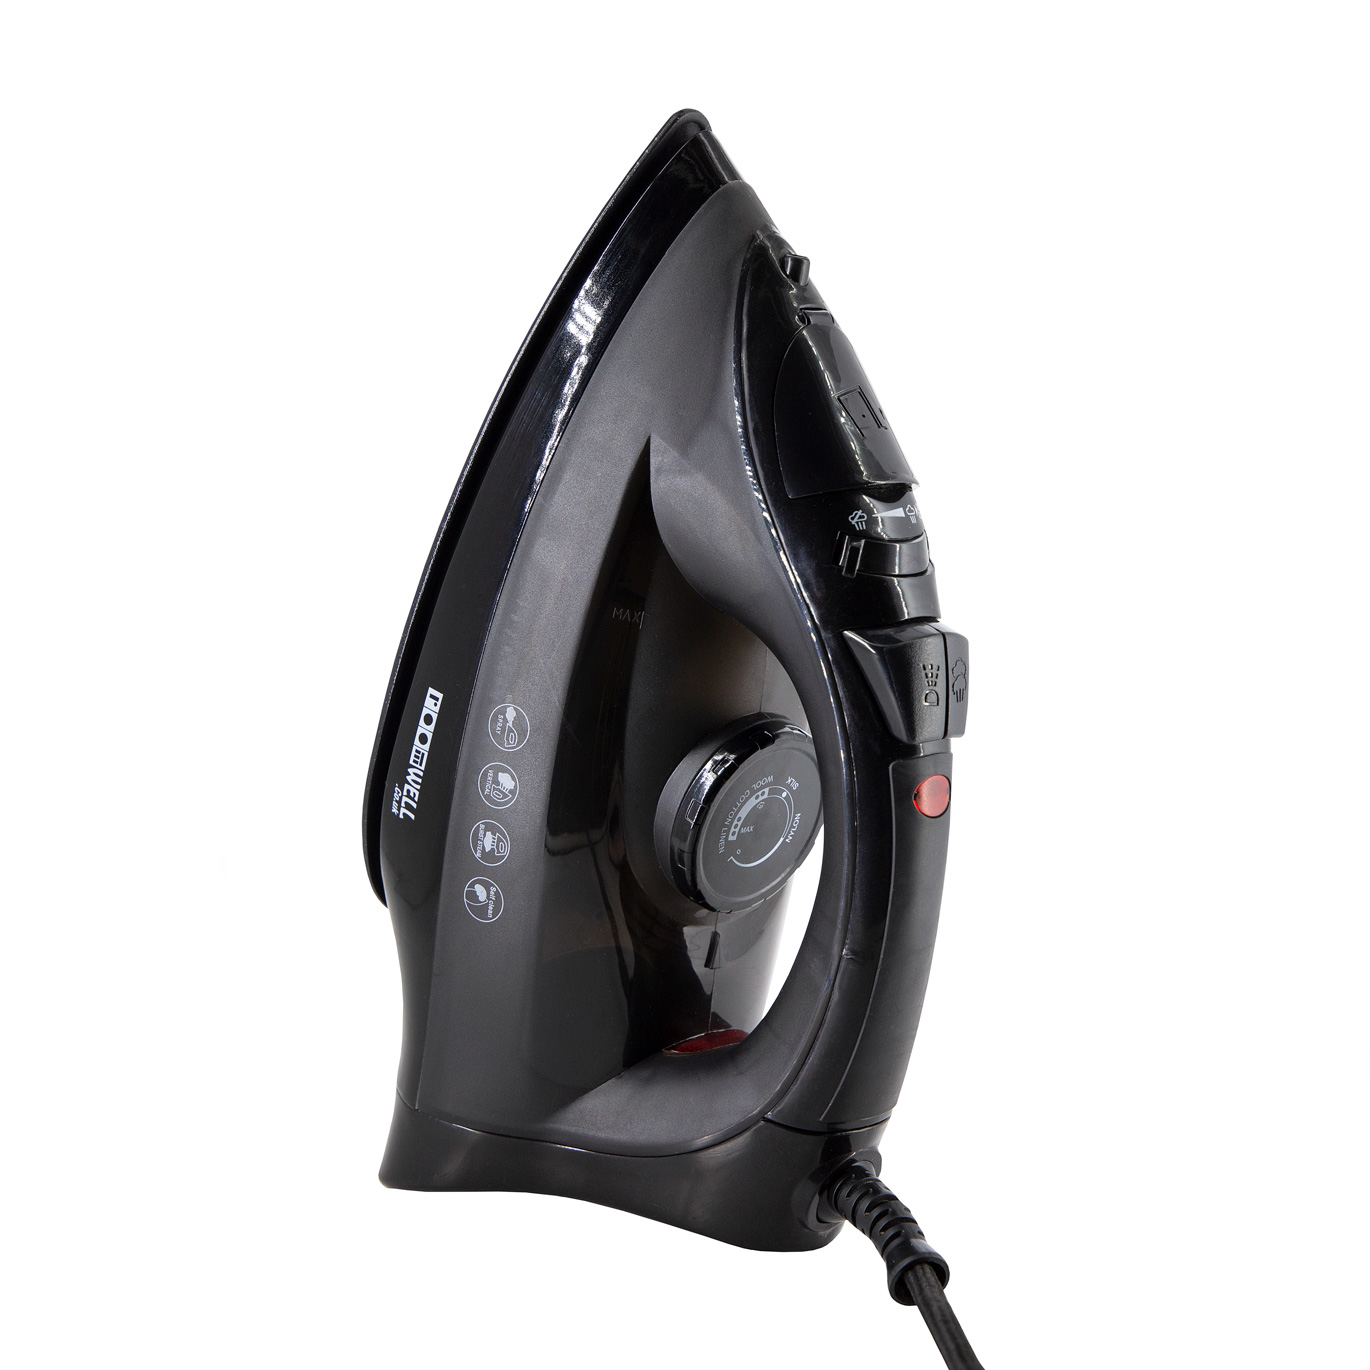 XPRESS STEAM 2400W IRON – Roomwell